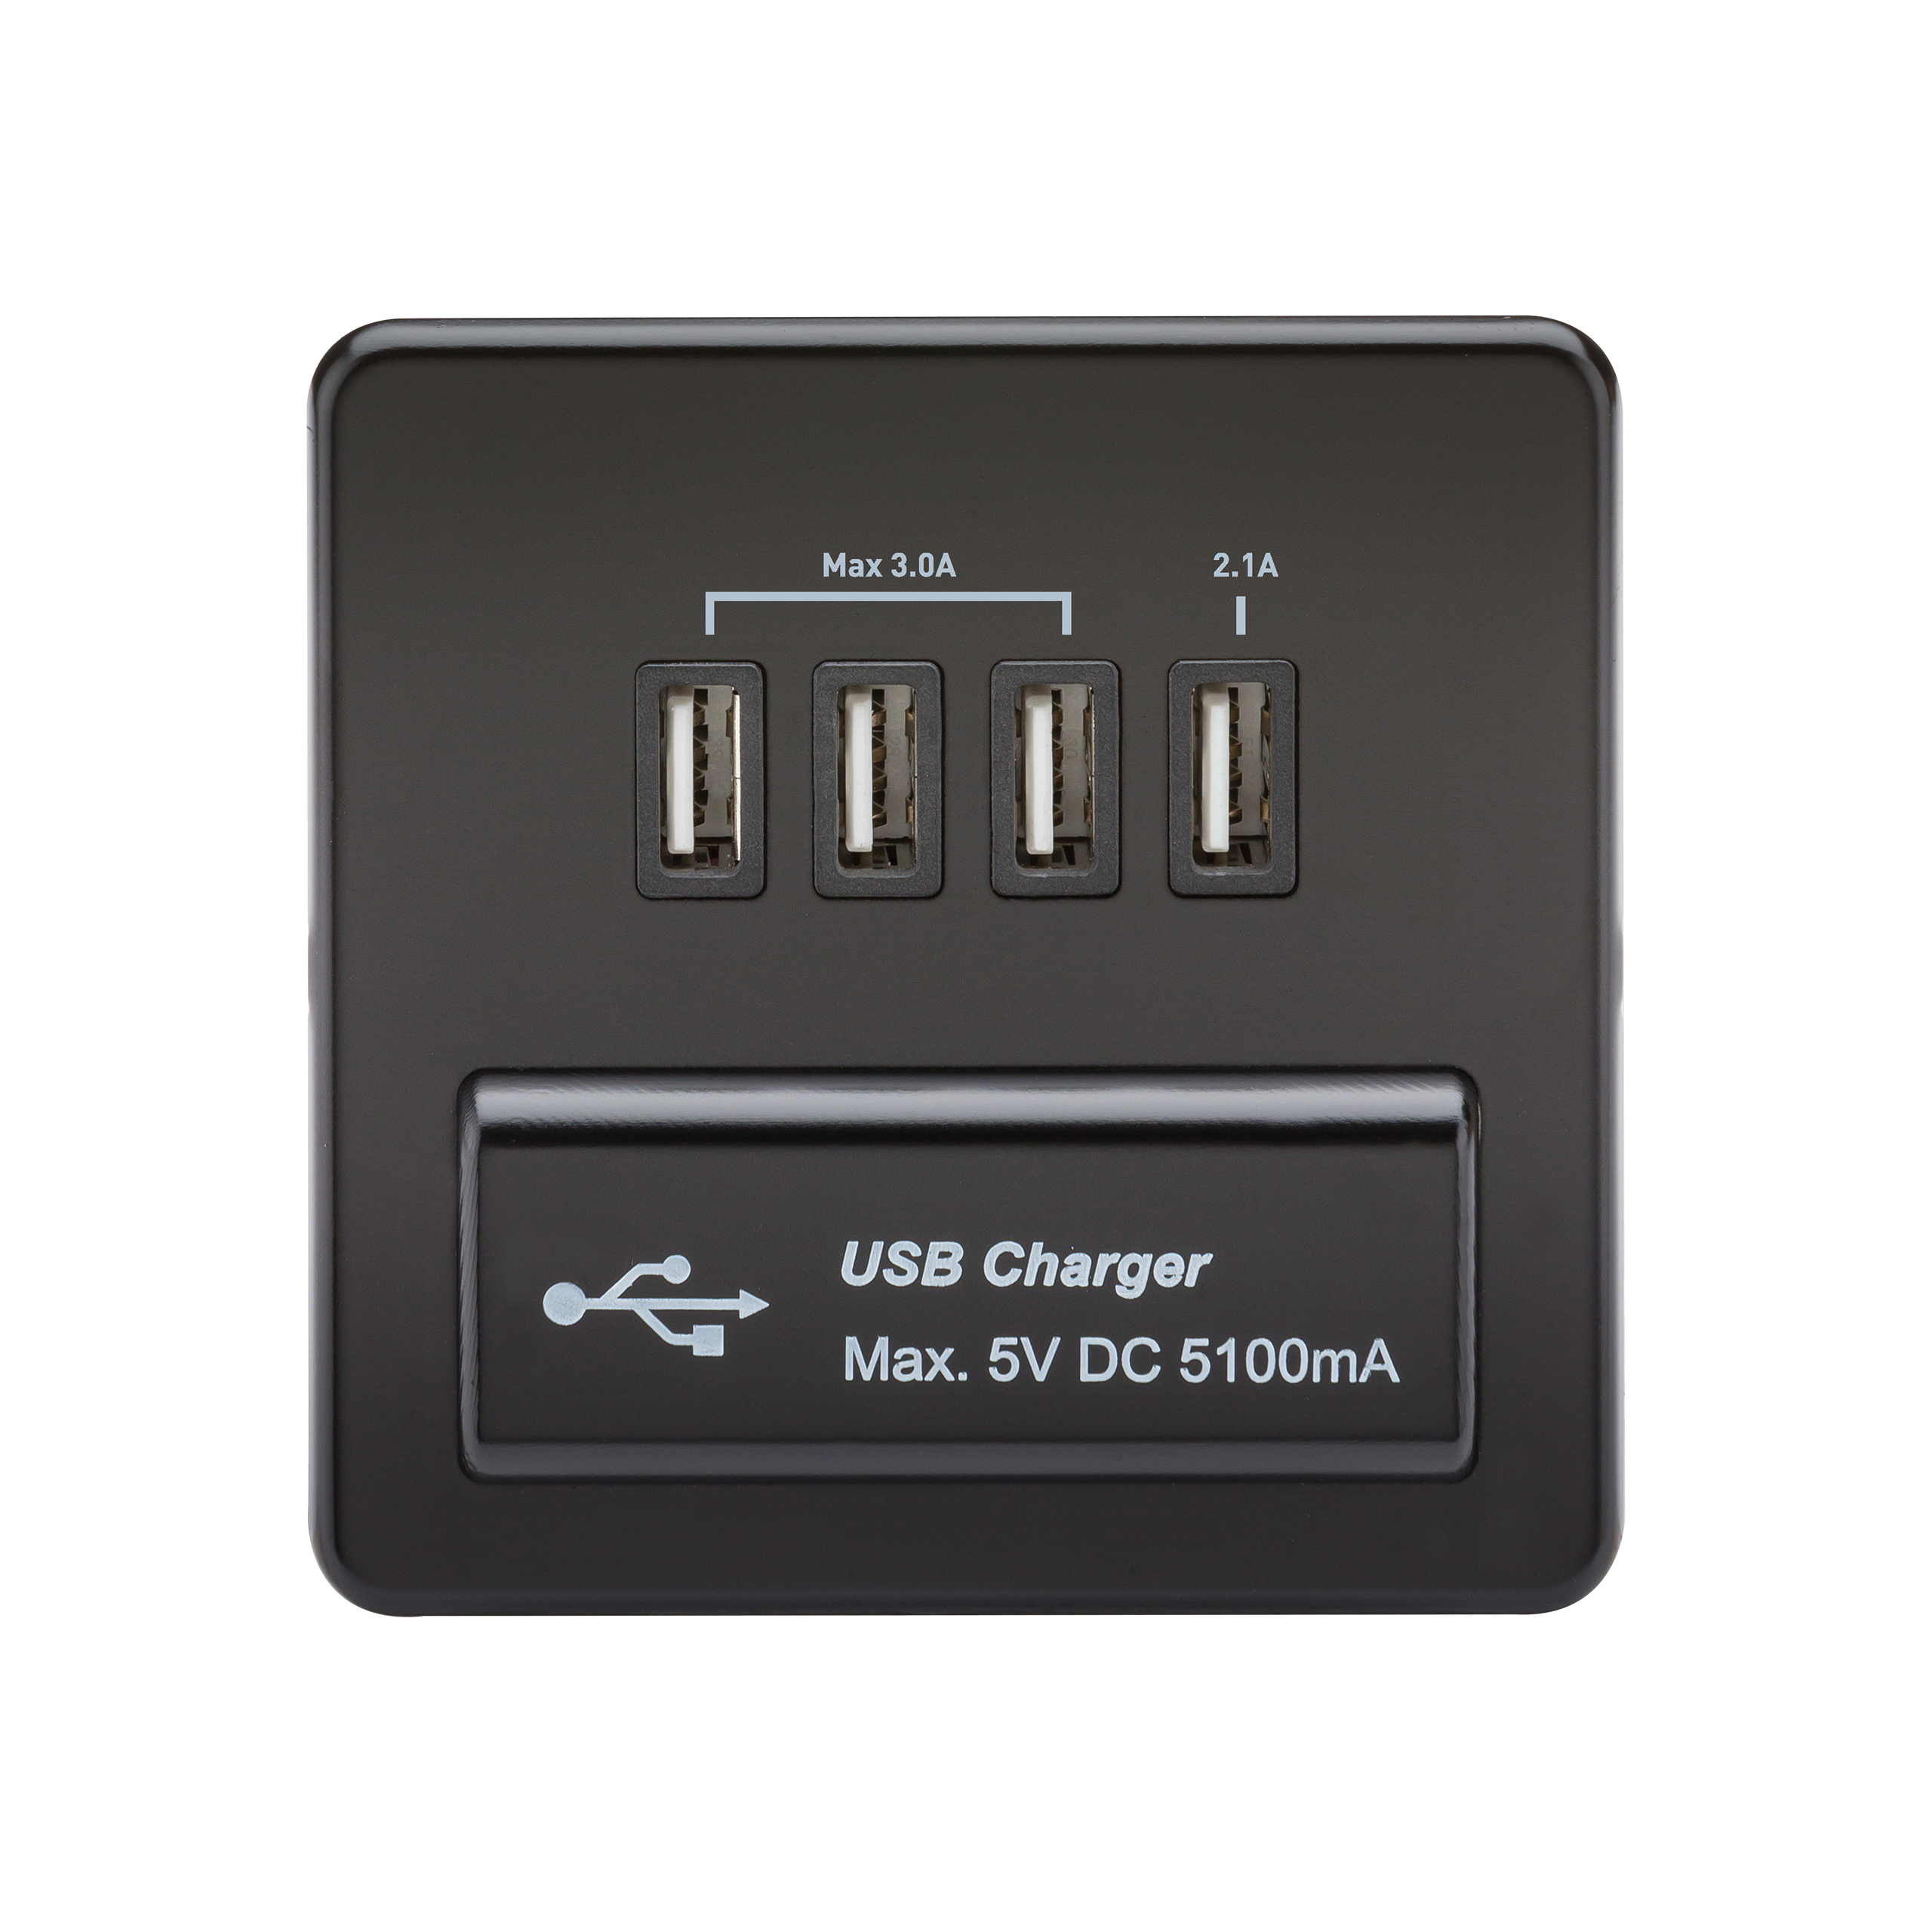 Screwless Quad USB Charger Outlet (5.1A) - Matt Black With Black Insert - SFQUADMB 